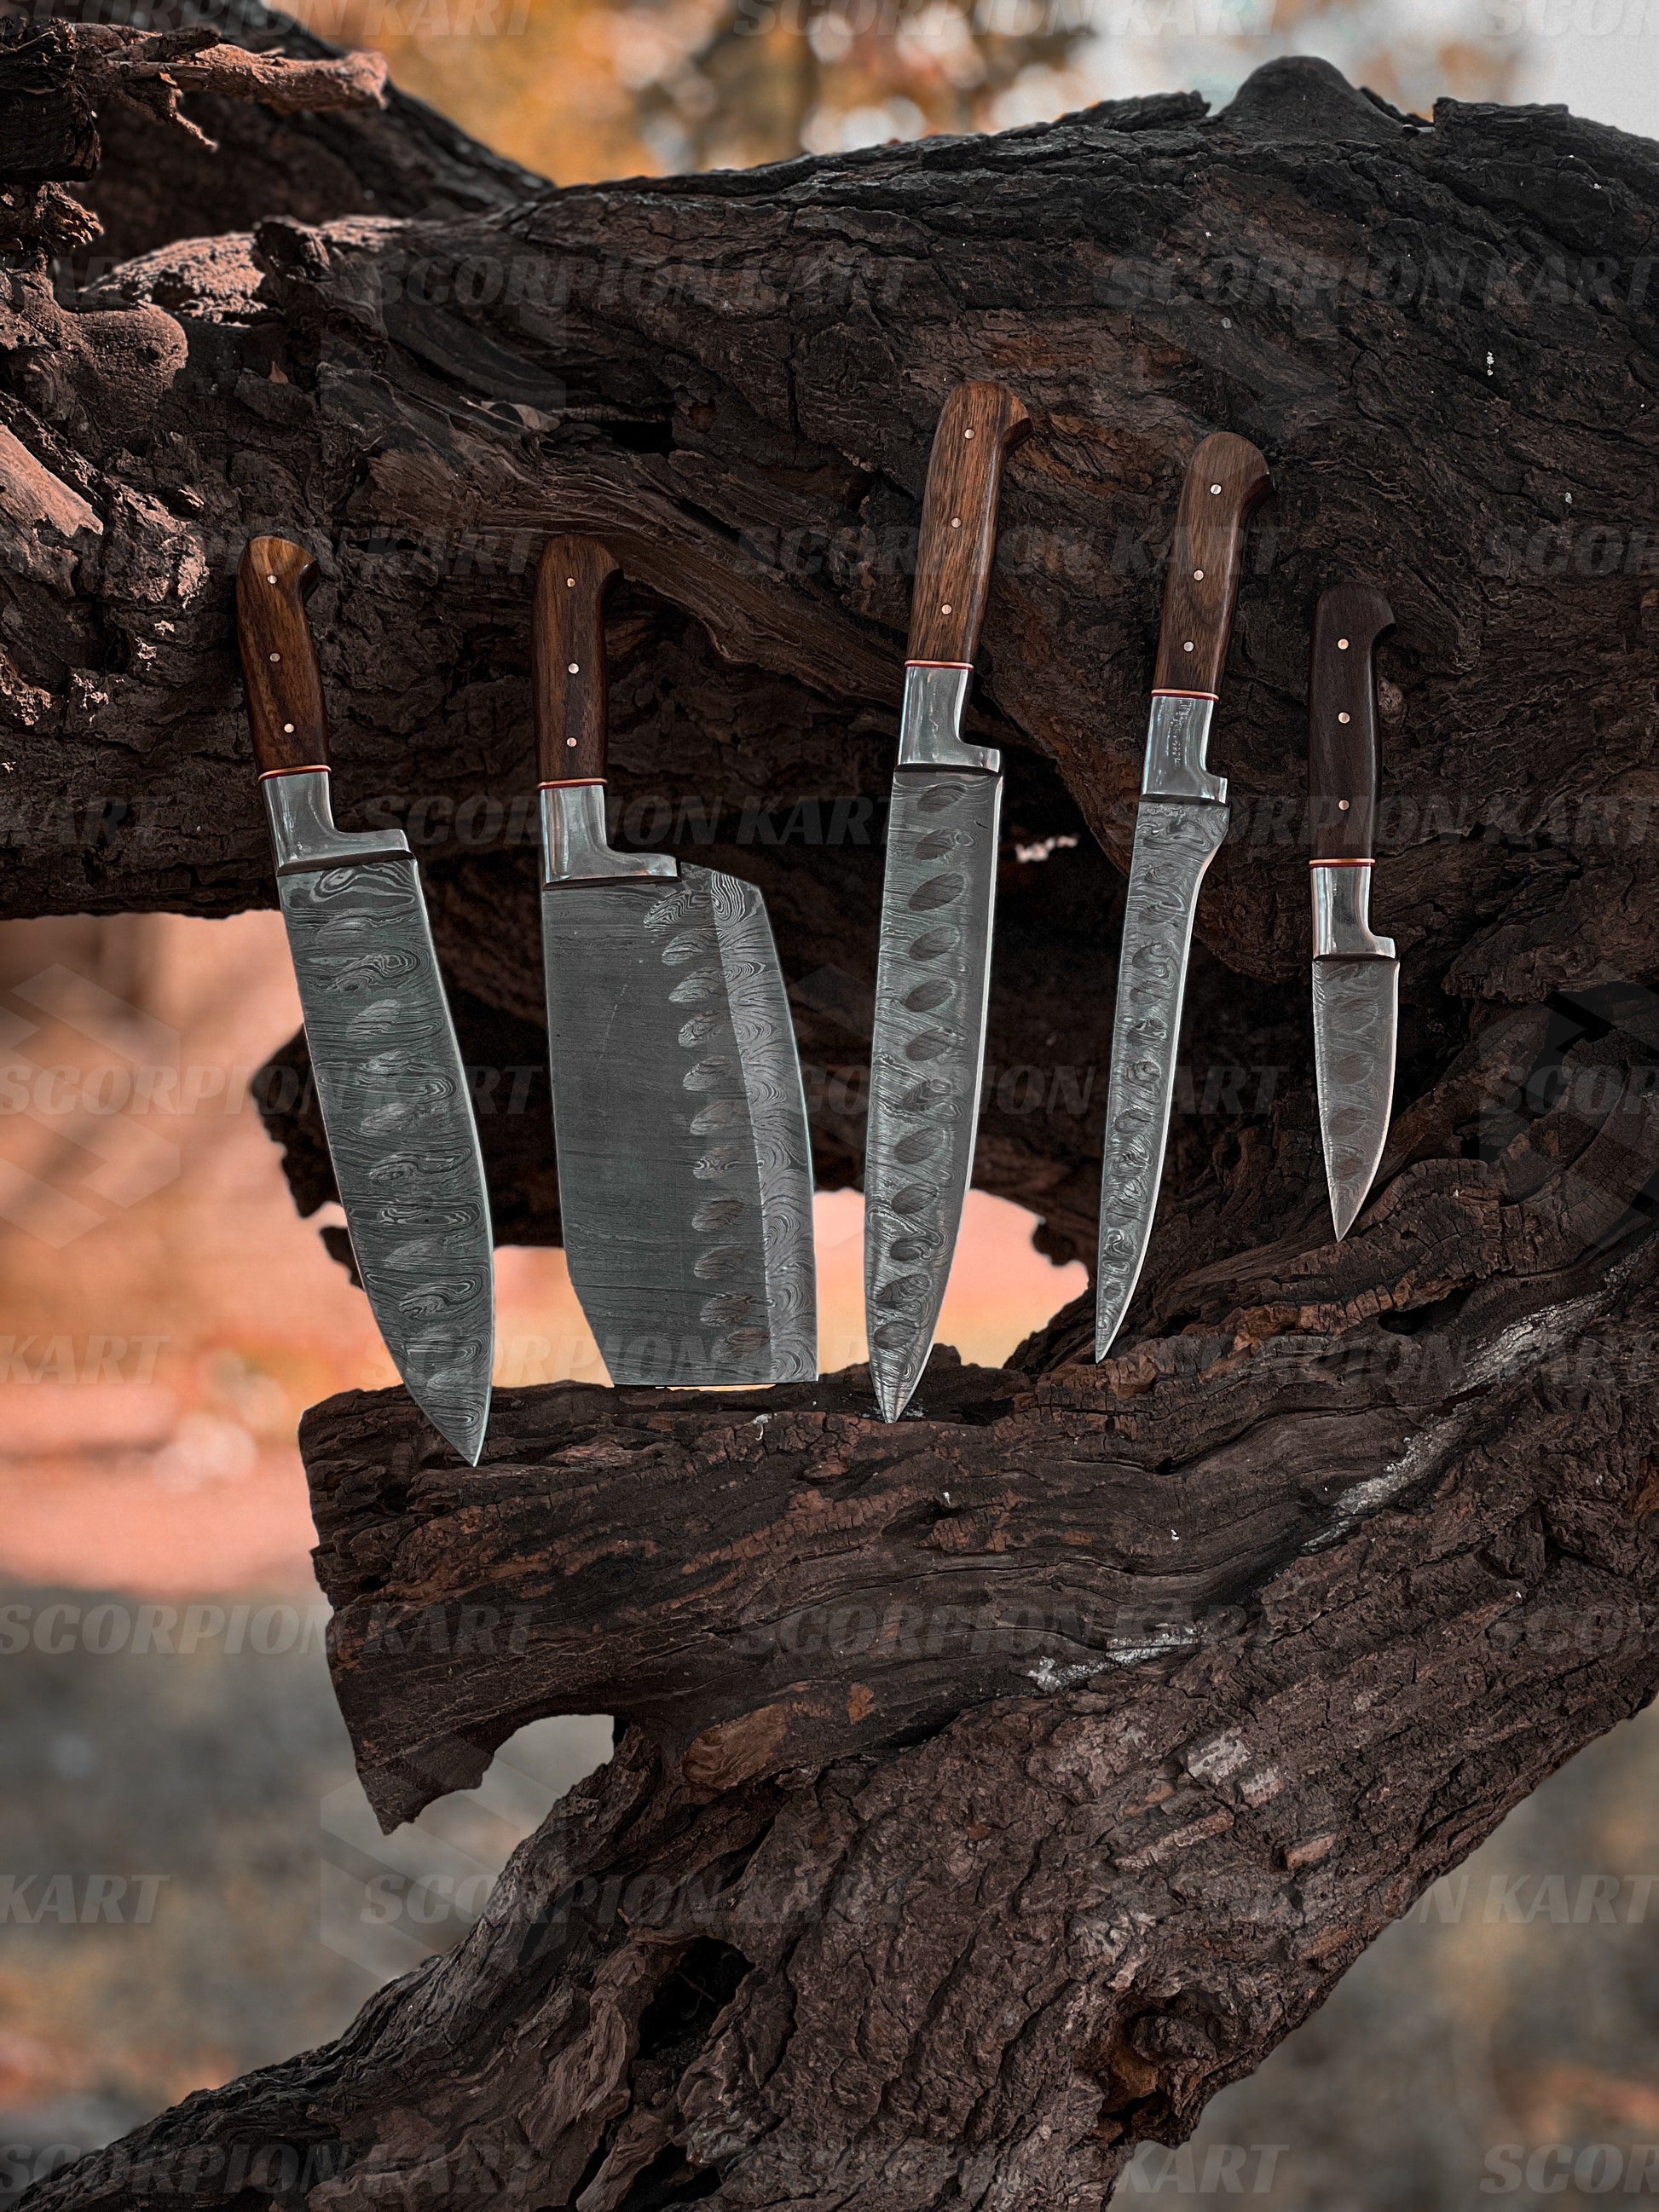 Premium 5-Piece Henkel Rosewood + Special Burl Pro Chef's Knife Set - The Ultimate Kitchen Essential for Autumn, Thanksgiving, and Christmas Gift-Giving Season - Premium best Happy Valentine Day gift from SCORPION KART - Just $160! Shop now at SCORPION KART